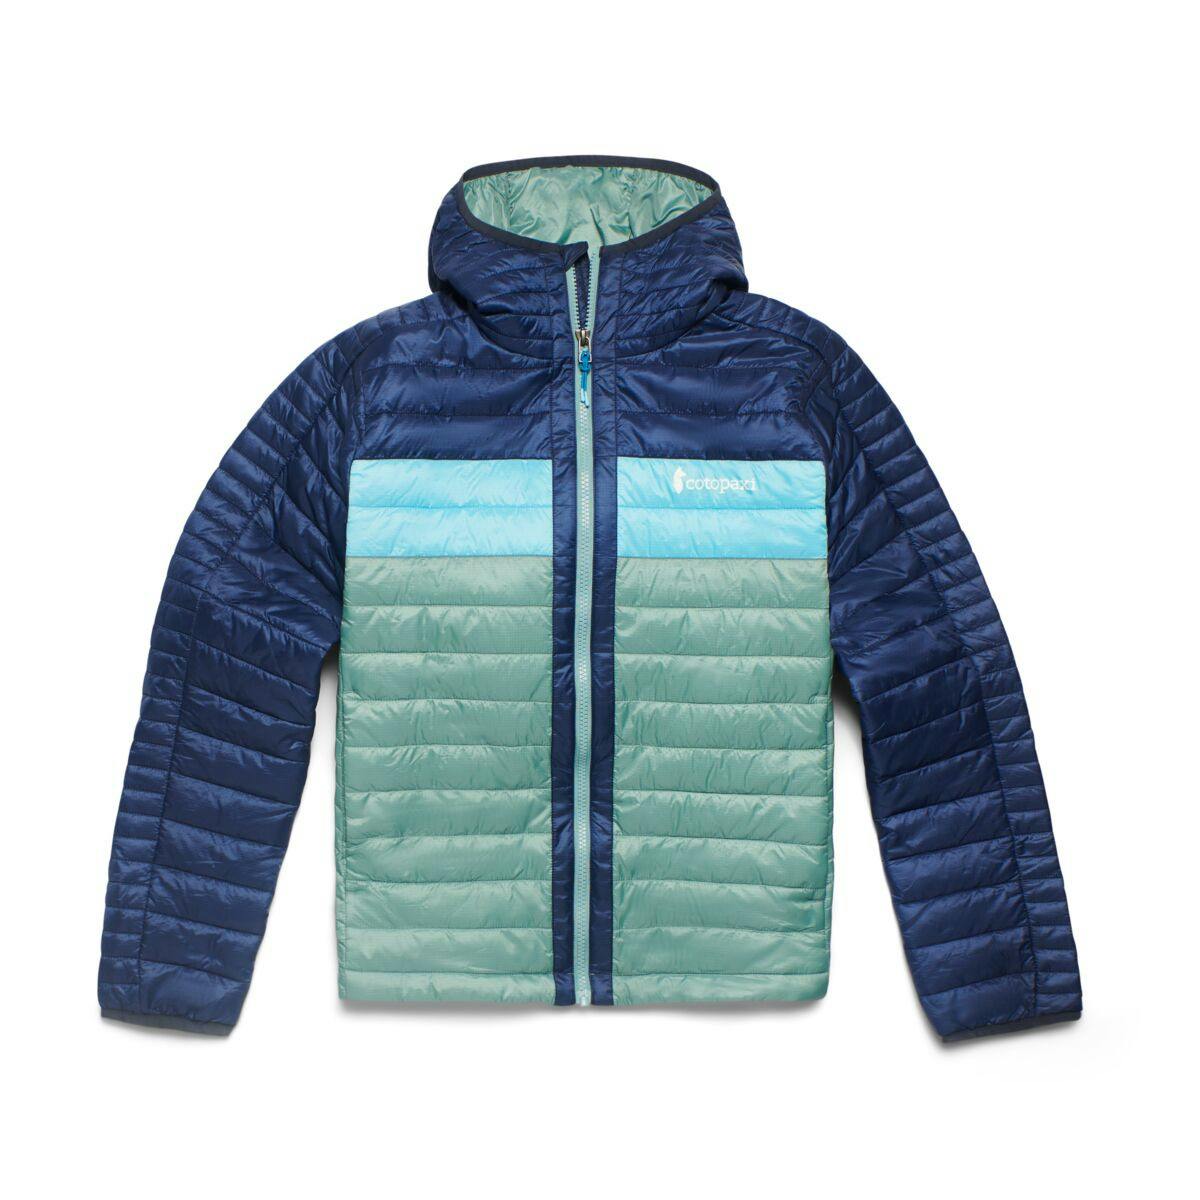 Cotopaxi Women's Capa Insulated Hooded Jacket